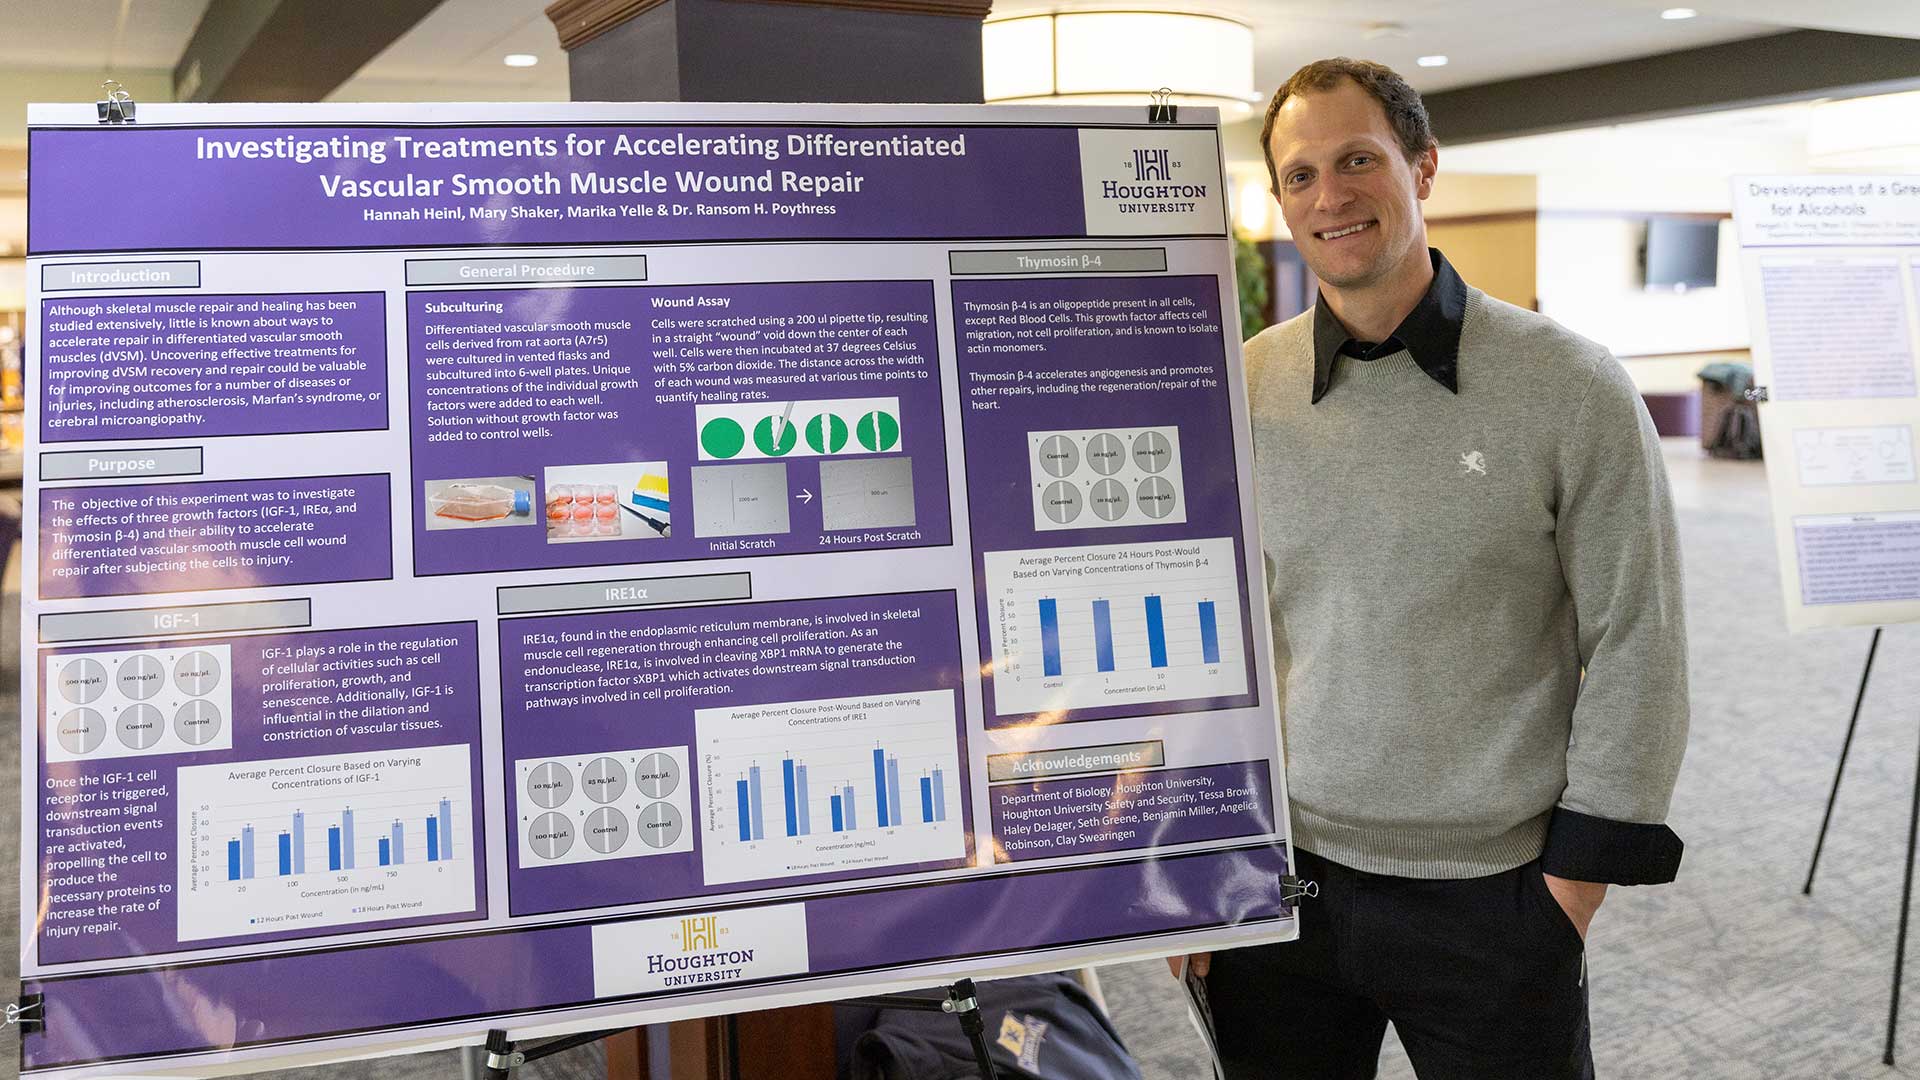 Professor Ransom Poythress standing next to his presentation board at the Faculty Scholarship Day at Houghton.